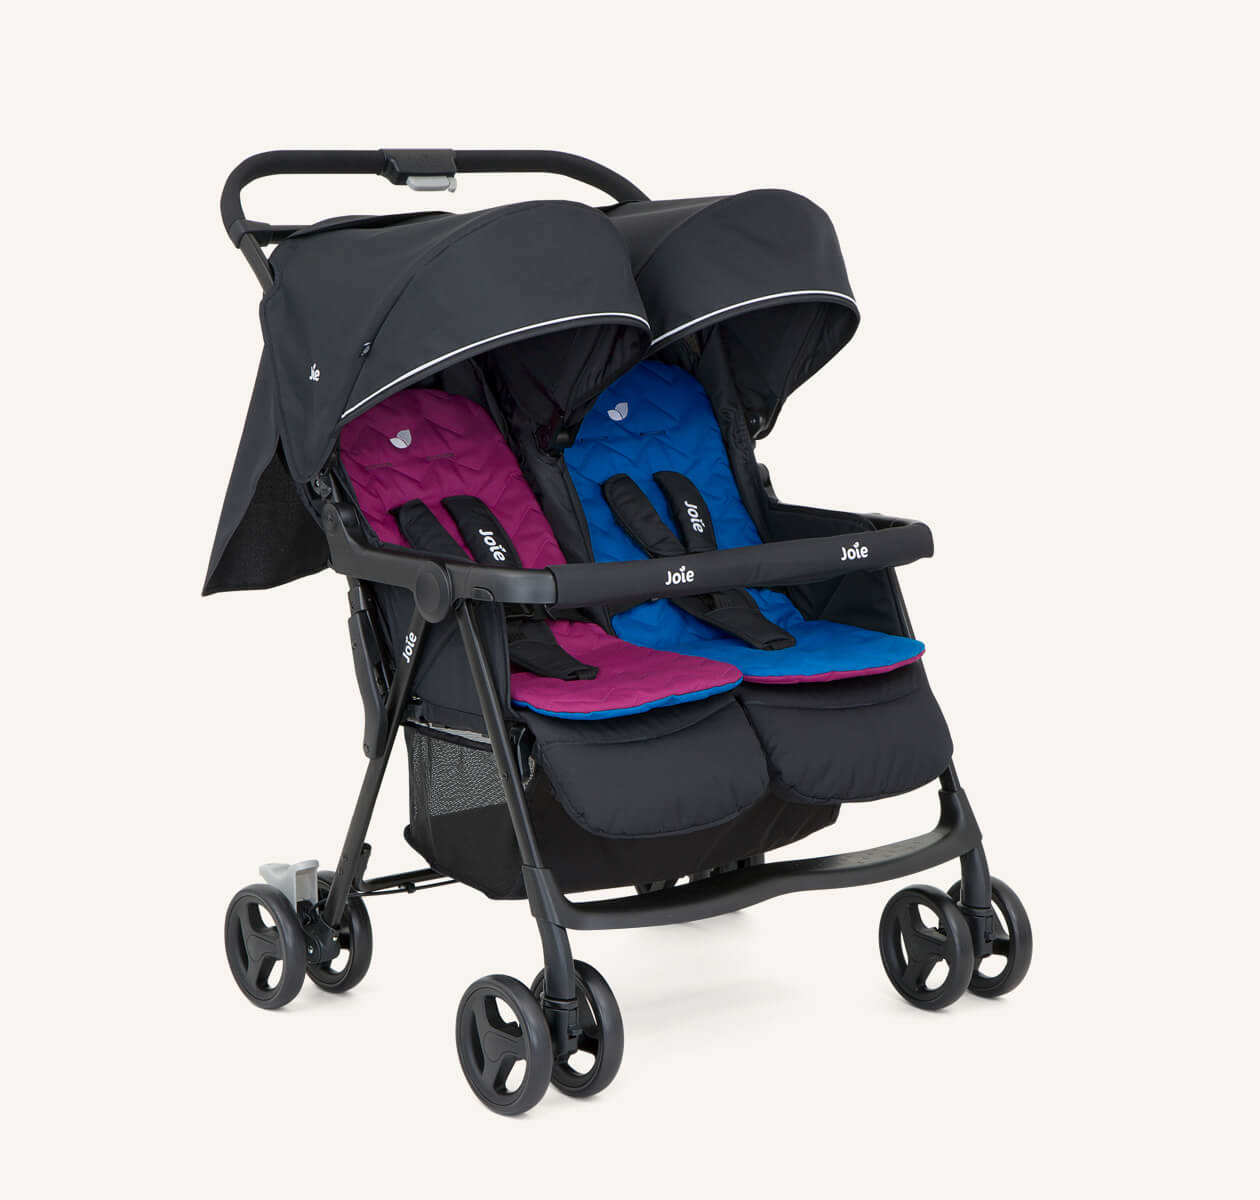  The Joie Aire Twin side-by-side double stroller in light gray at an angle, with a peach coloured seat insert on the left seat and a light blue insert on the right seat.